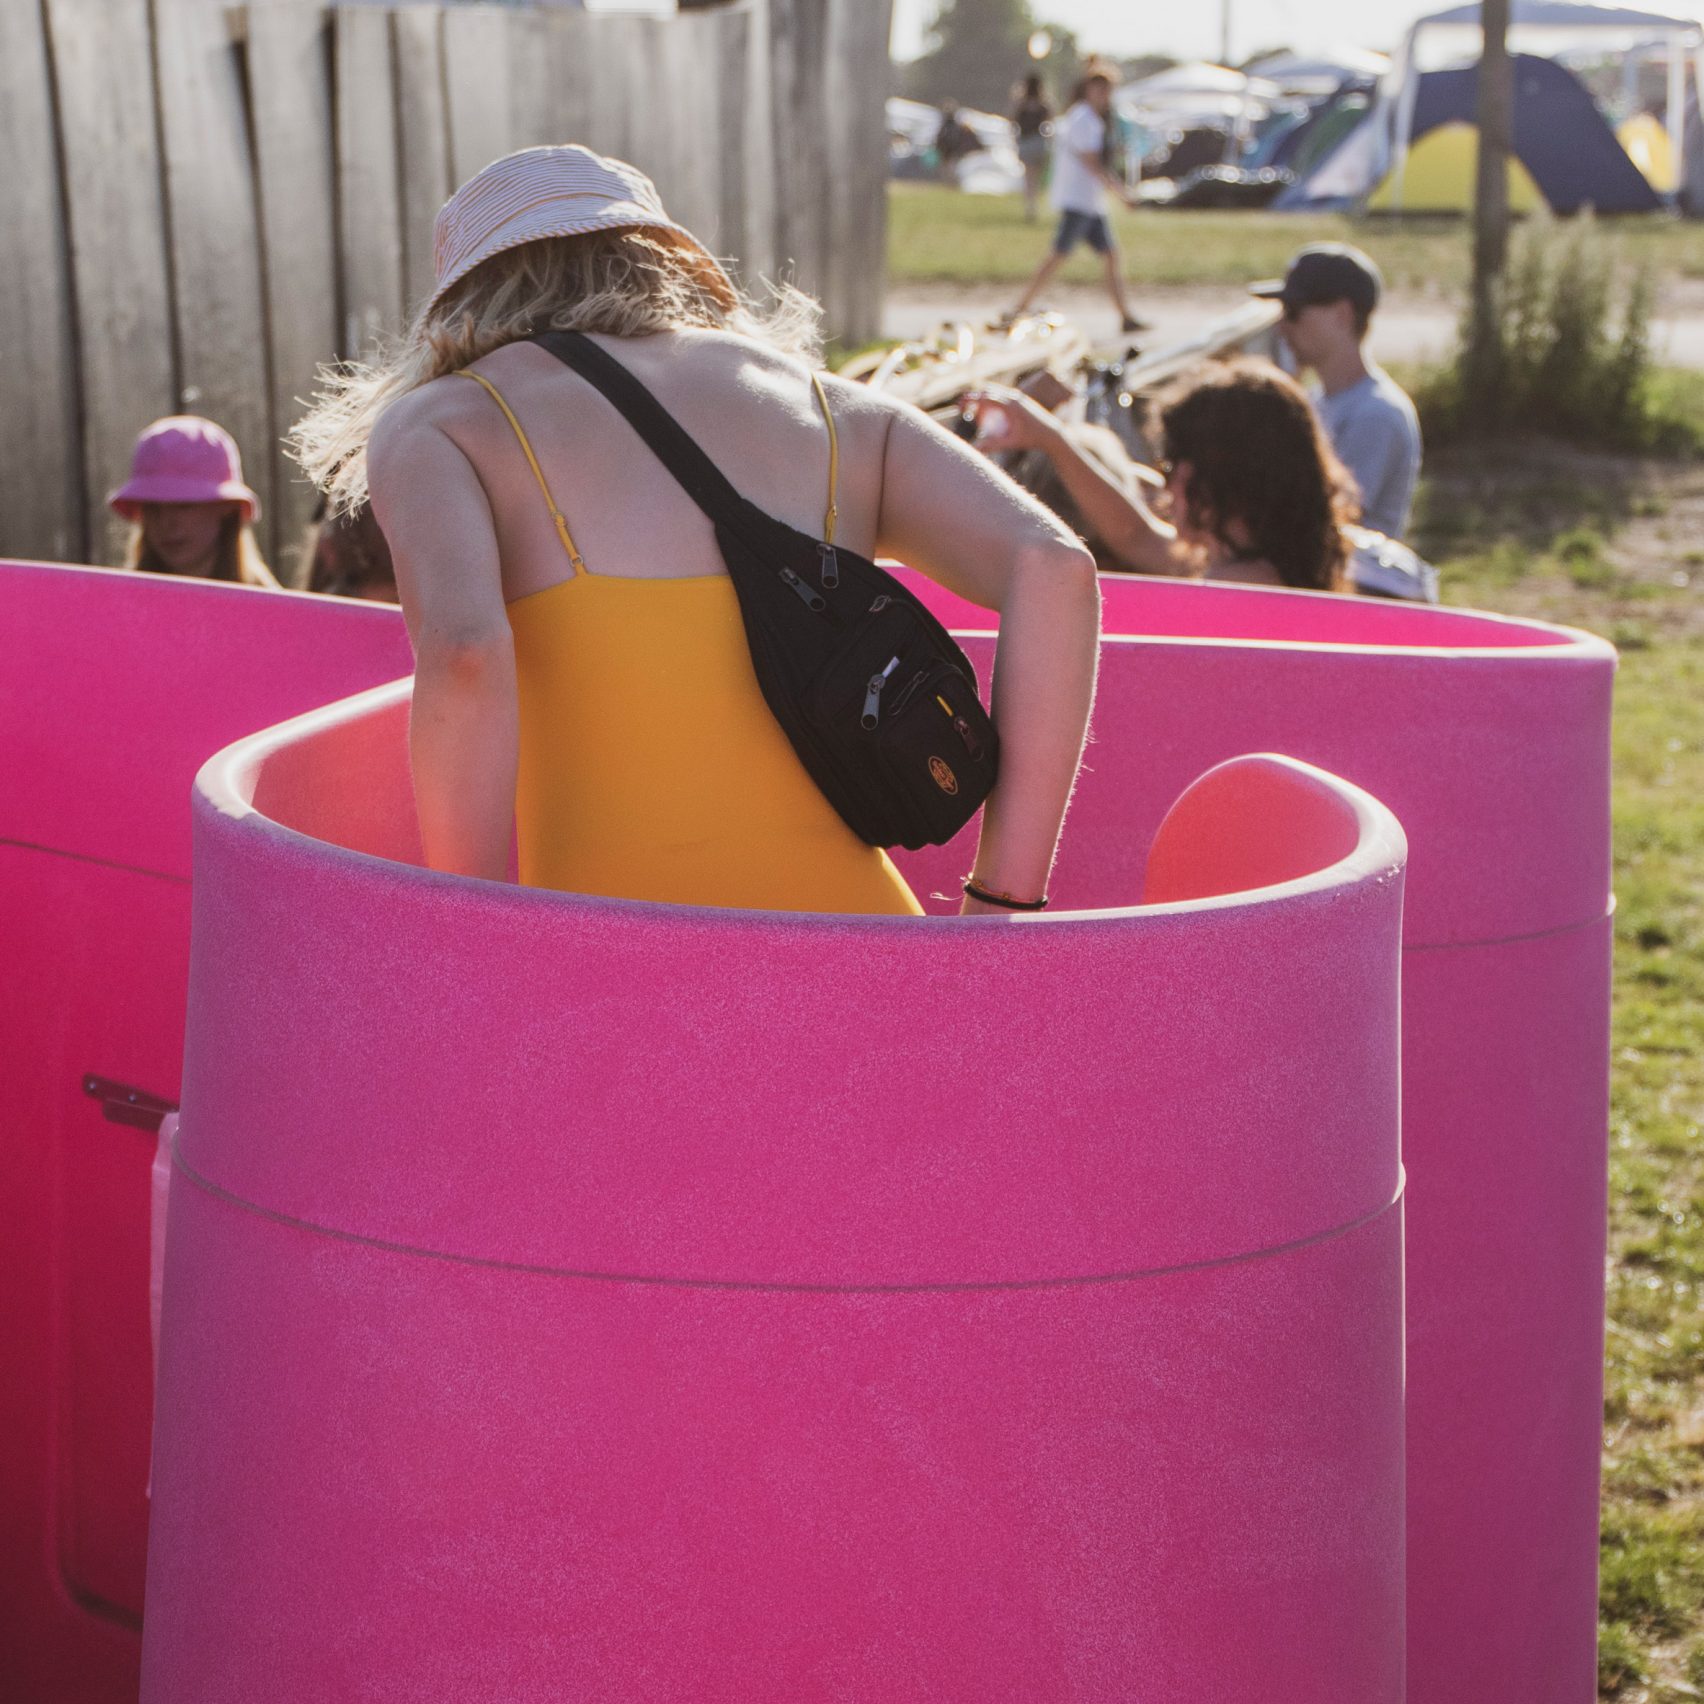 Six Outdoor Urinals For When You Need To Wee In The Wild